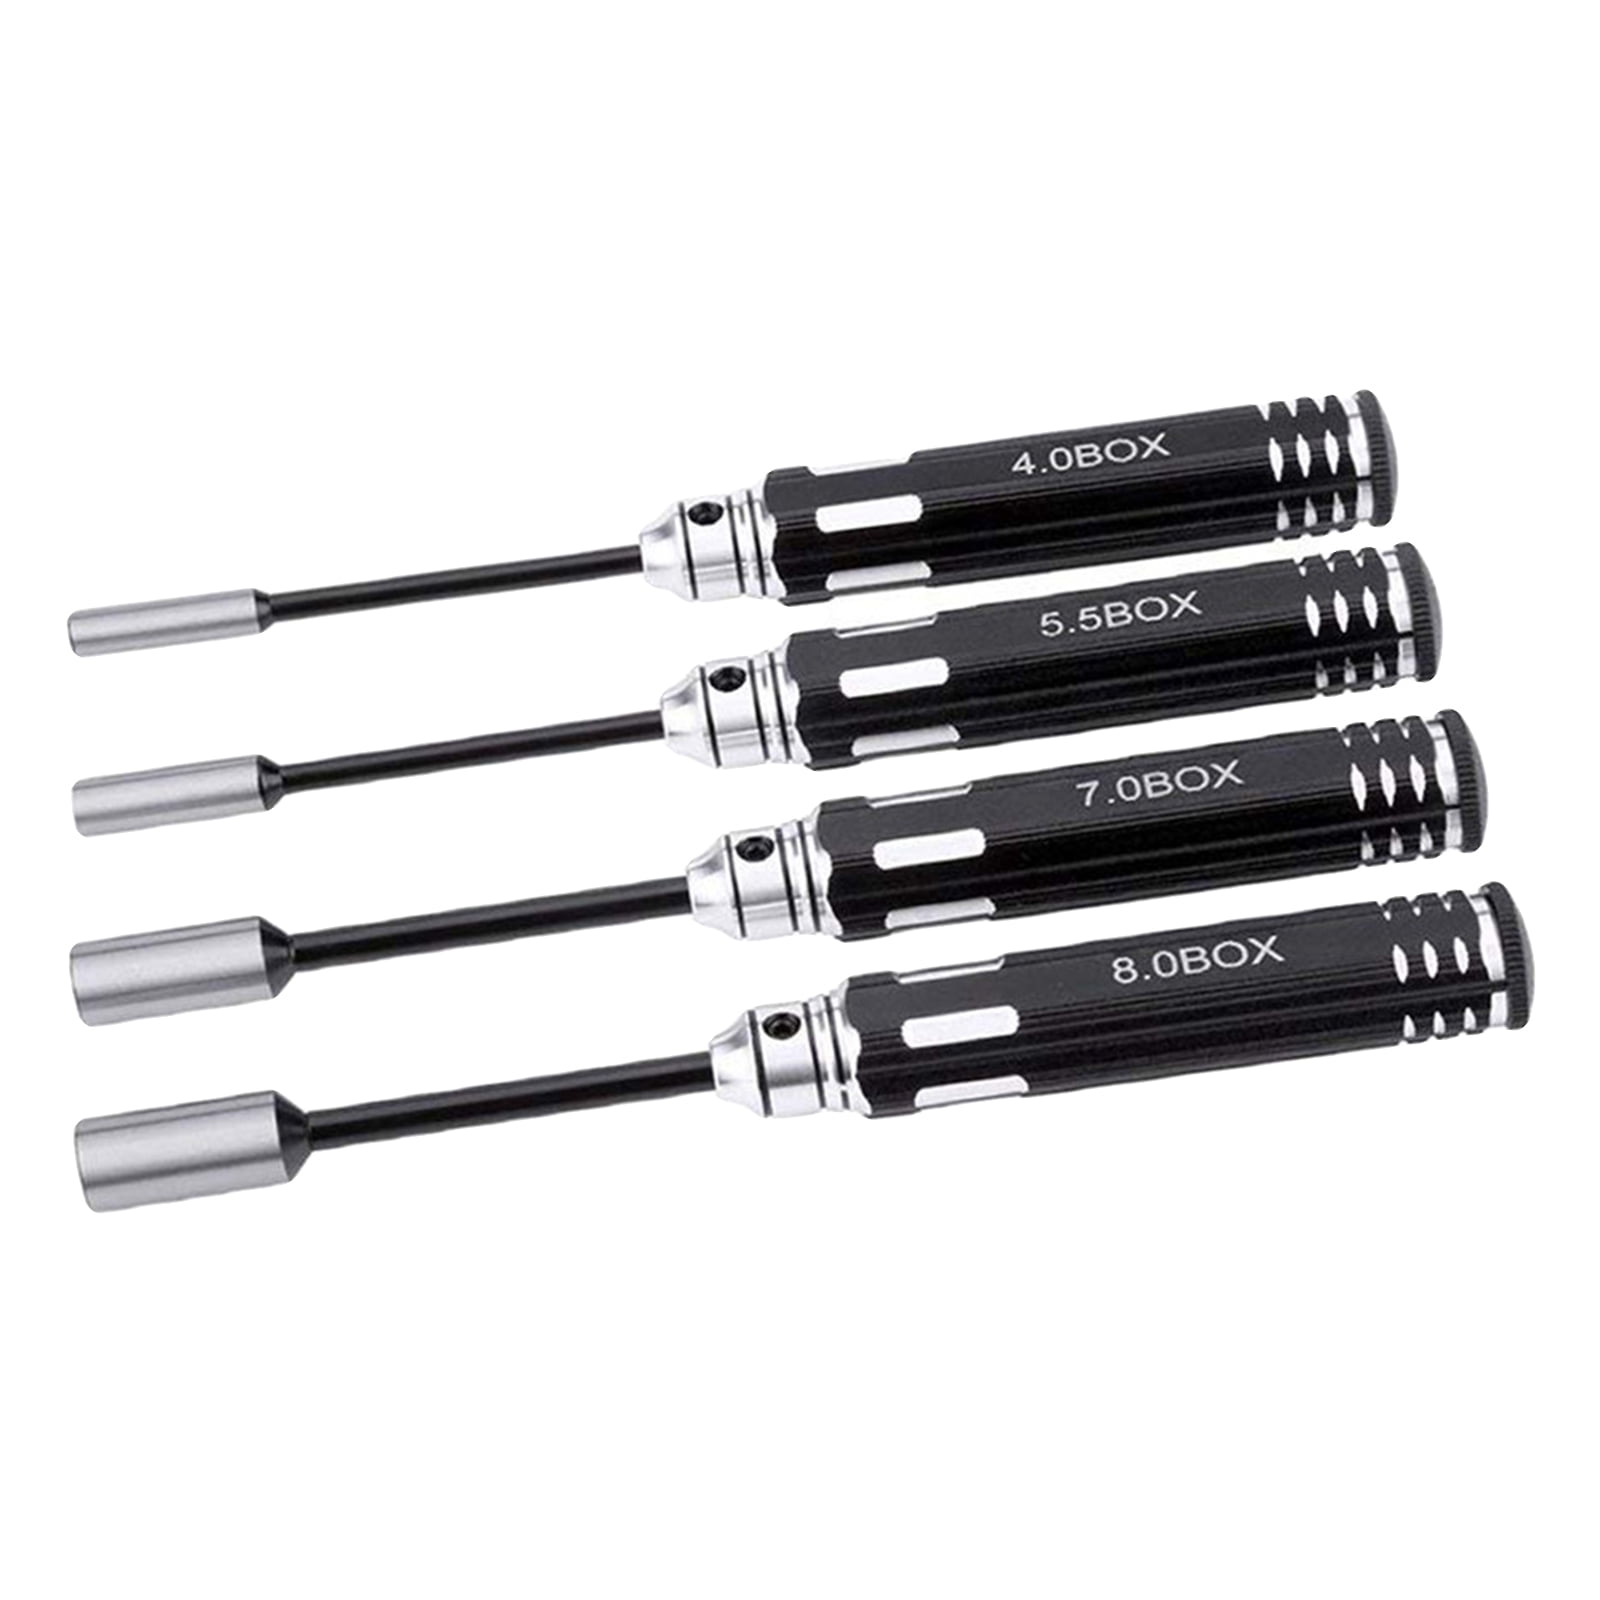 8x Hex Screwdrivers Set RC Repair Tool Kit For RC Drone Helicopter Boat Car NEW 